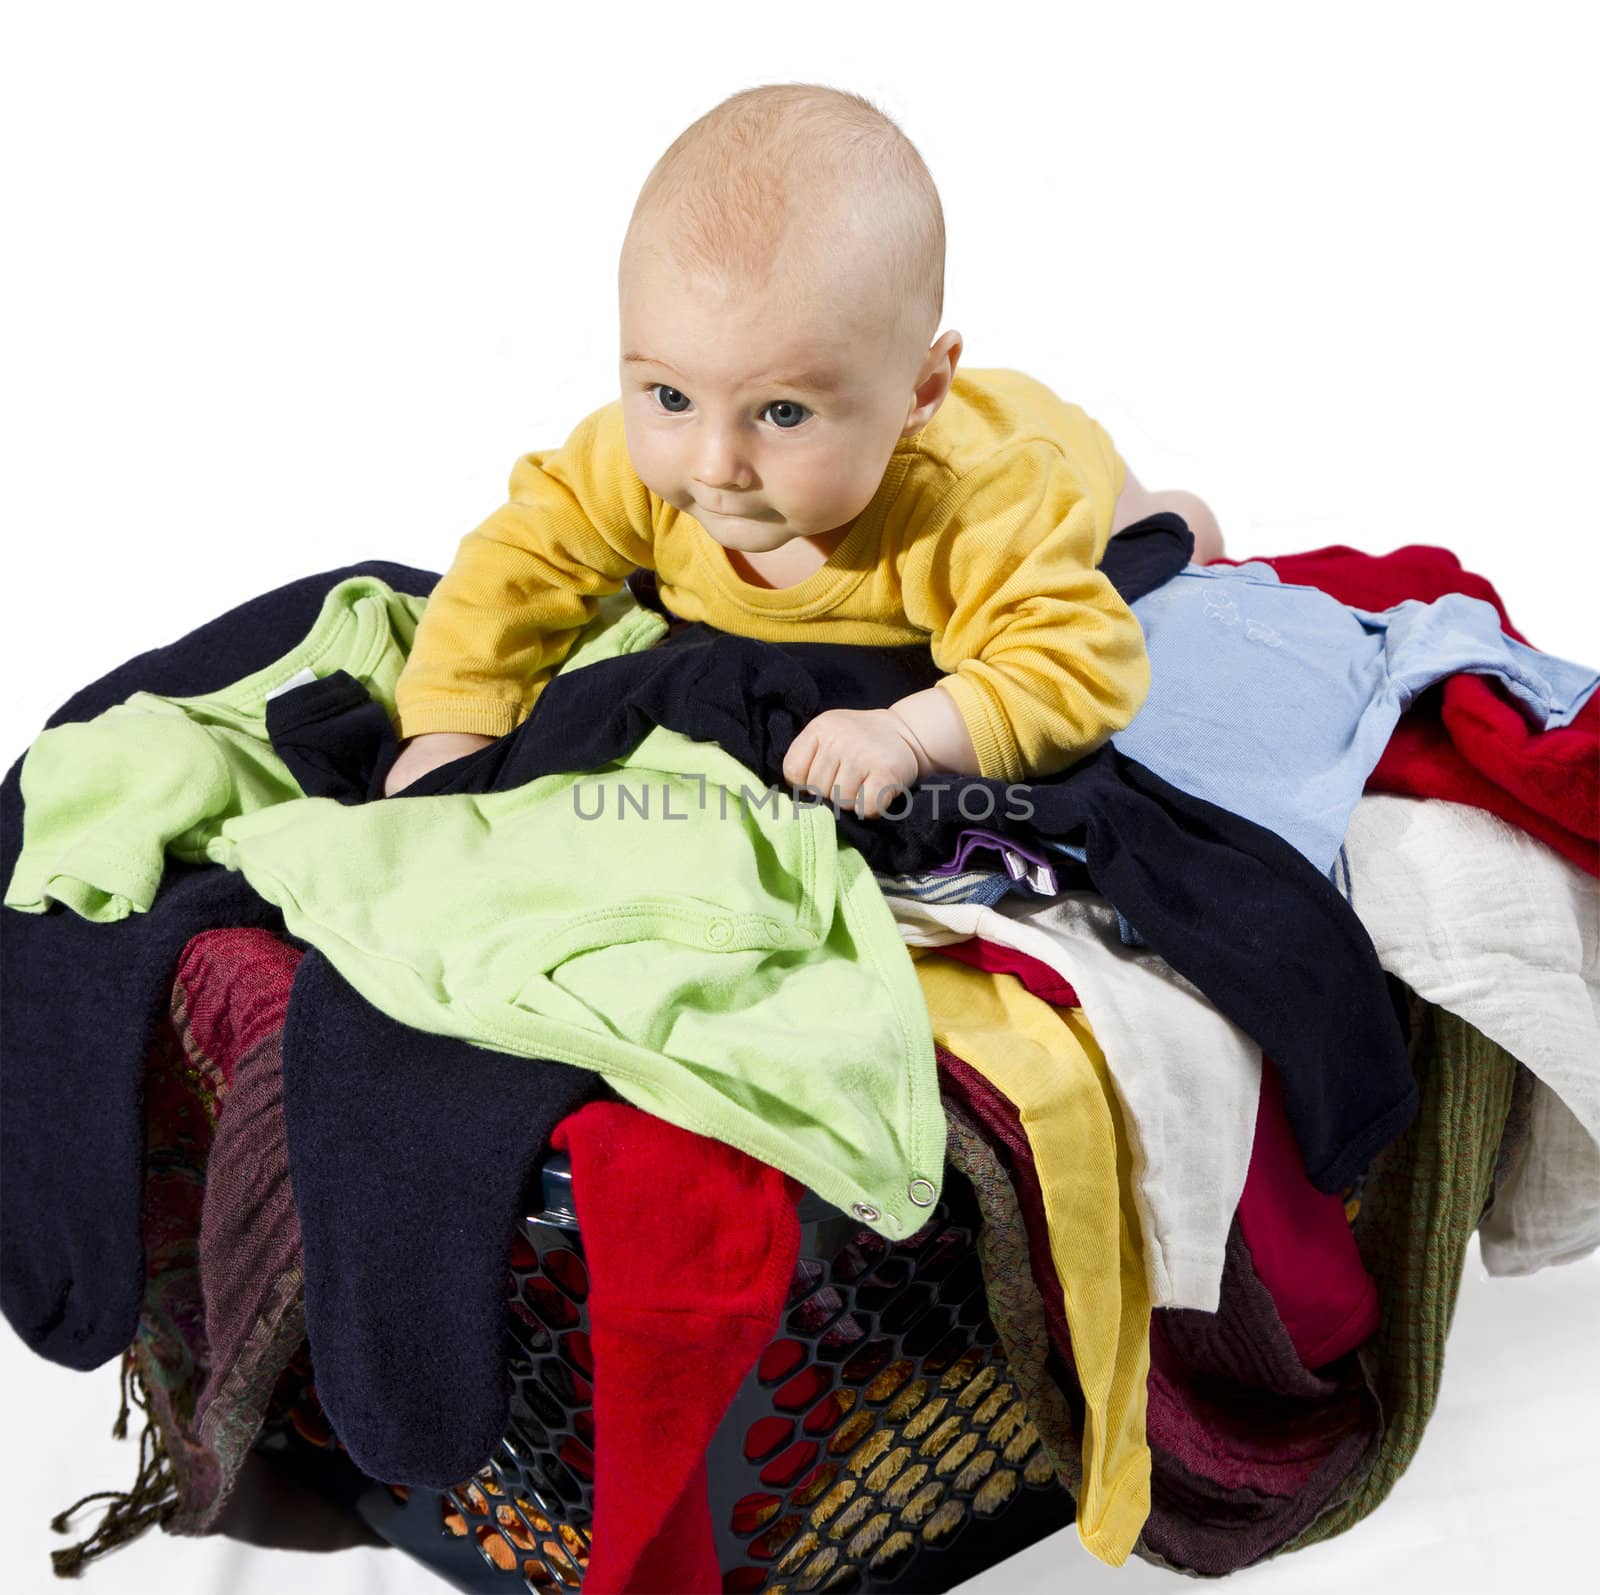 young child on many clothes in clothesbasket isolated on white background